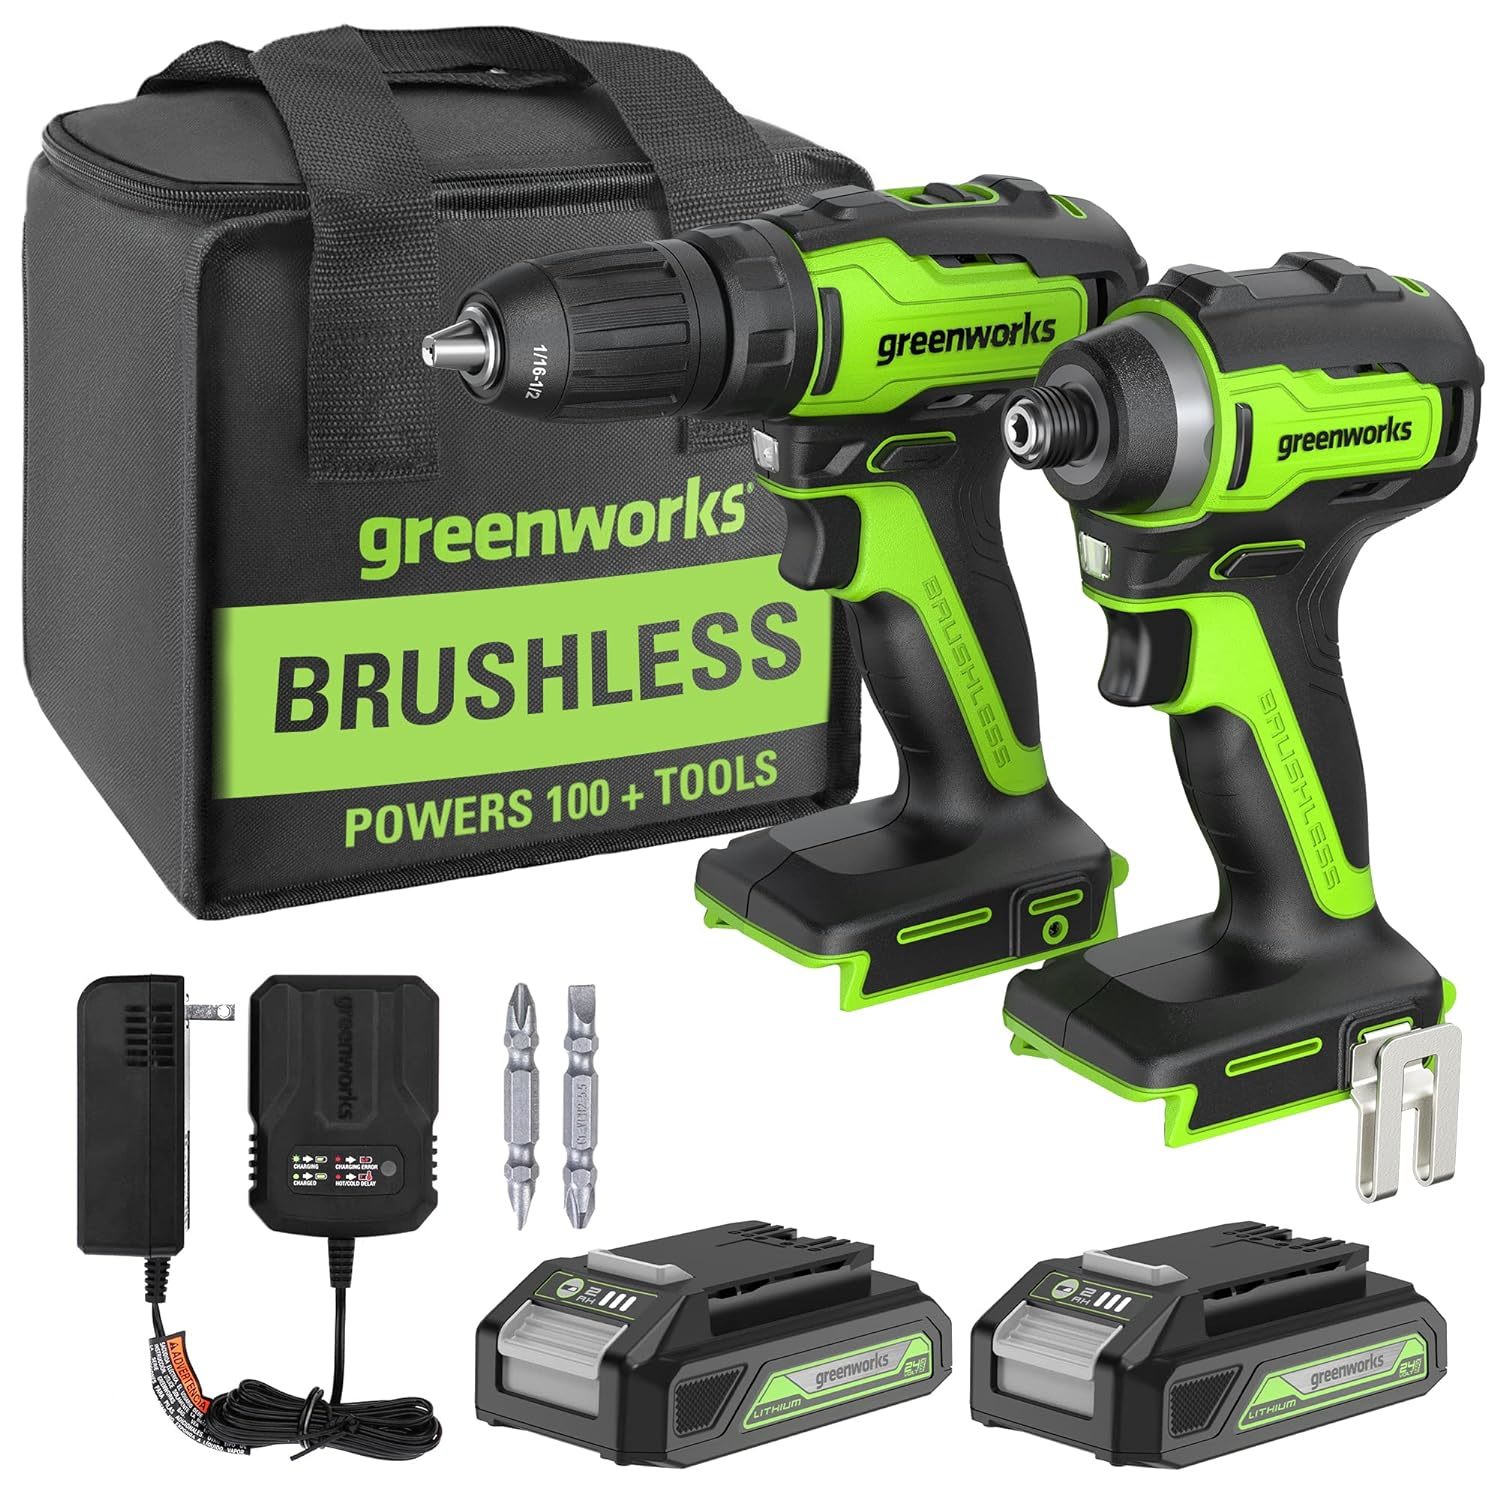 [Professional Grade] Greenworks 24V Max Cordless Brushless Drill + Impact Combo  - $198.99